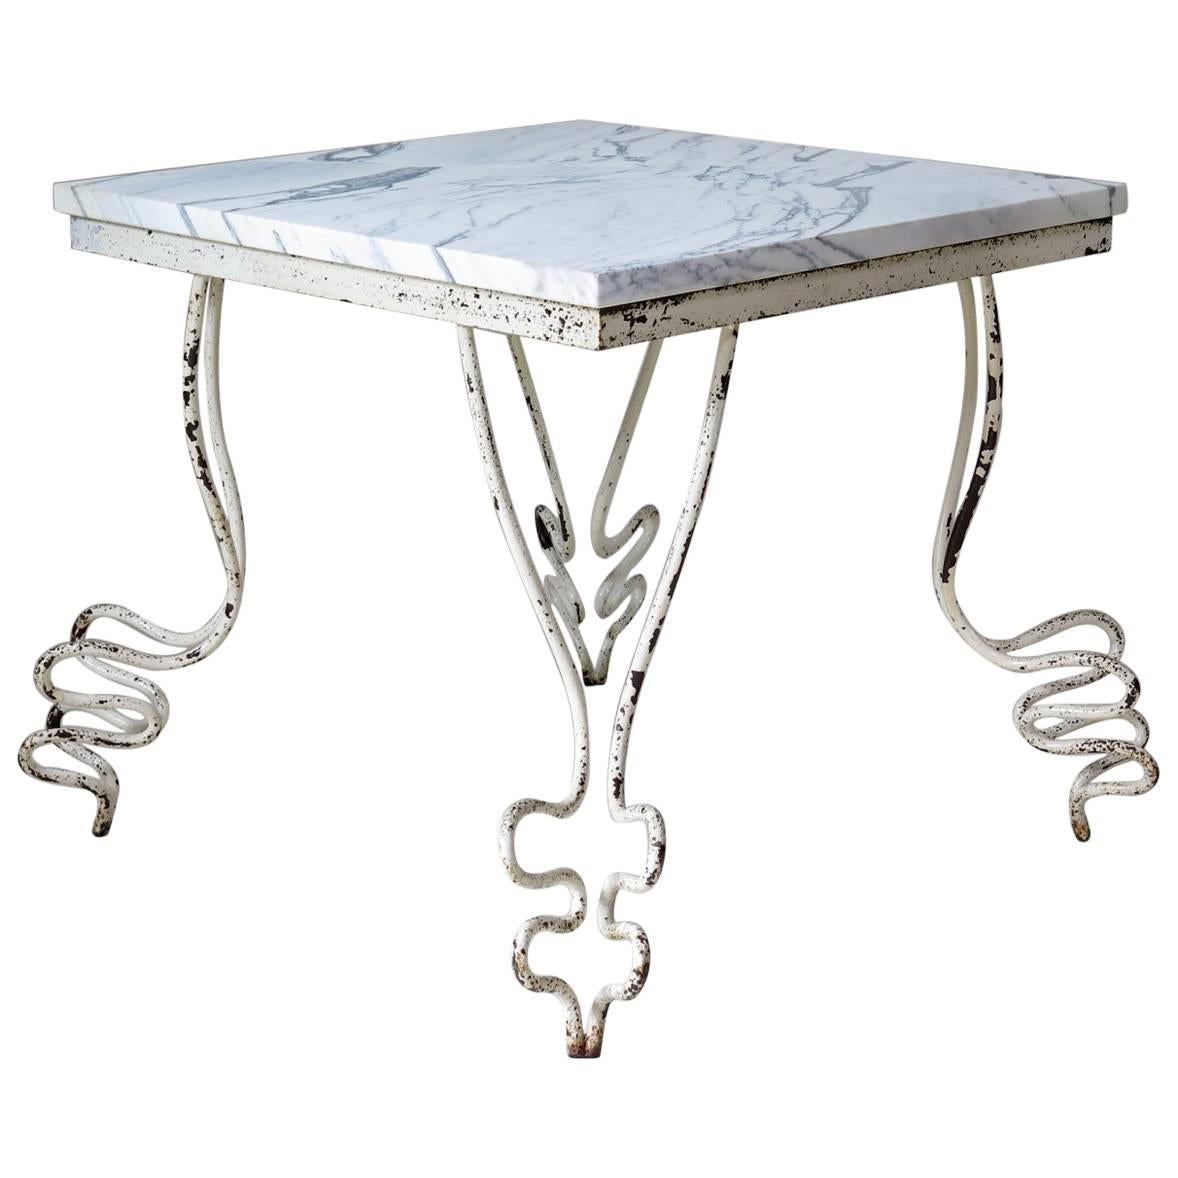 Wrought Iron & Marble "Zig-Zag" Table, France, 1950s